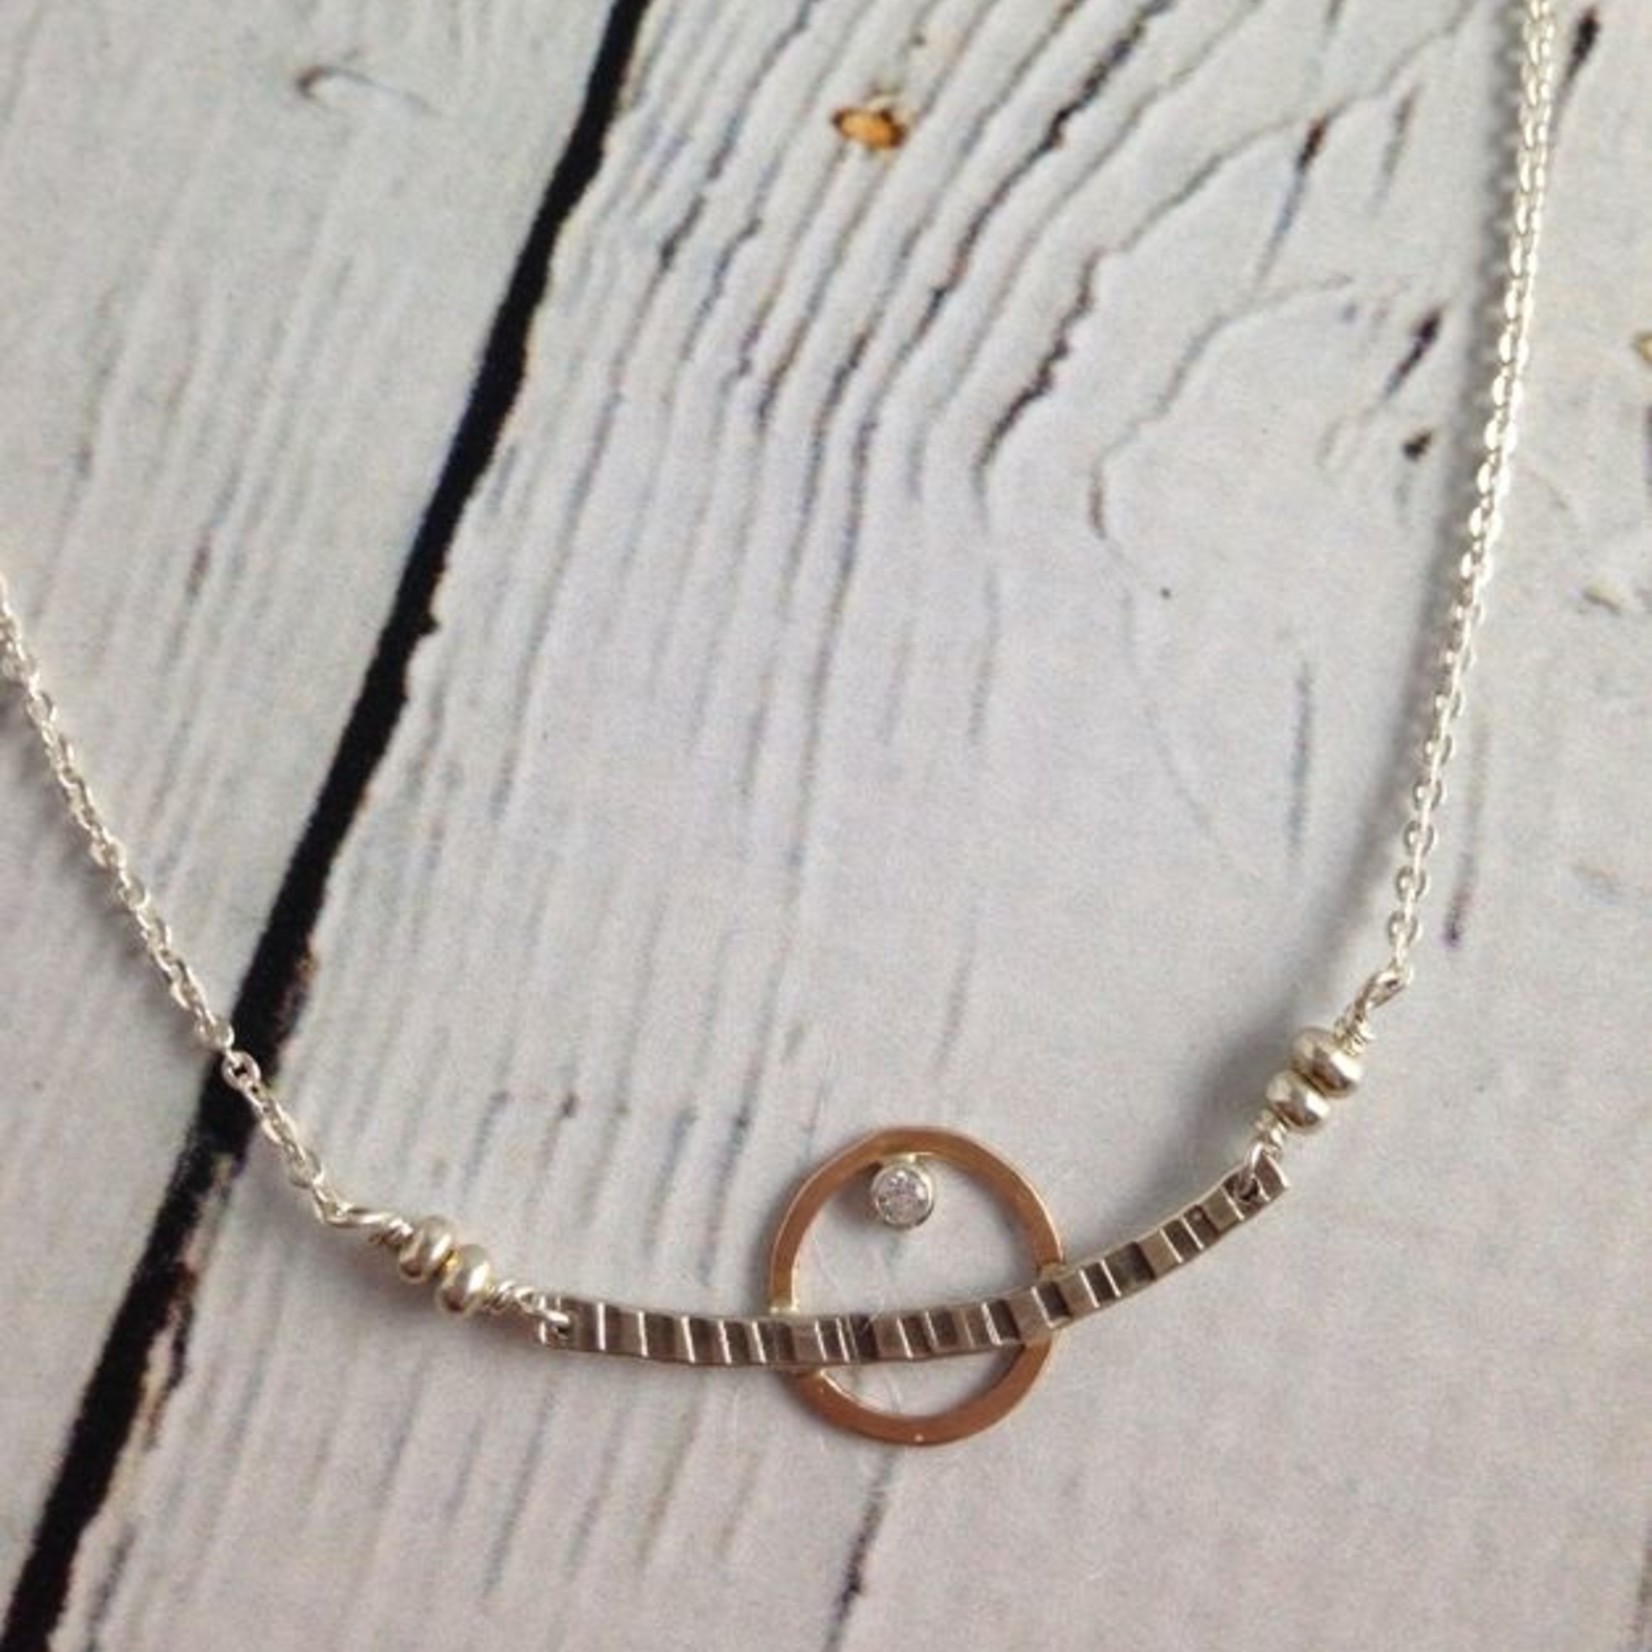 Handmade Etched sterling with 14kt goldfill circle and 2mm white cz necklace, 18"